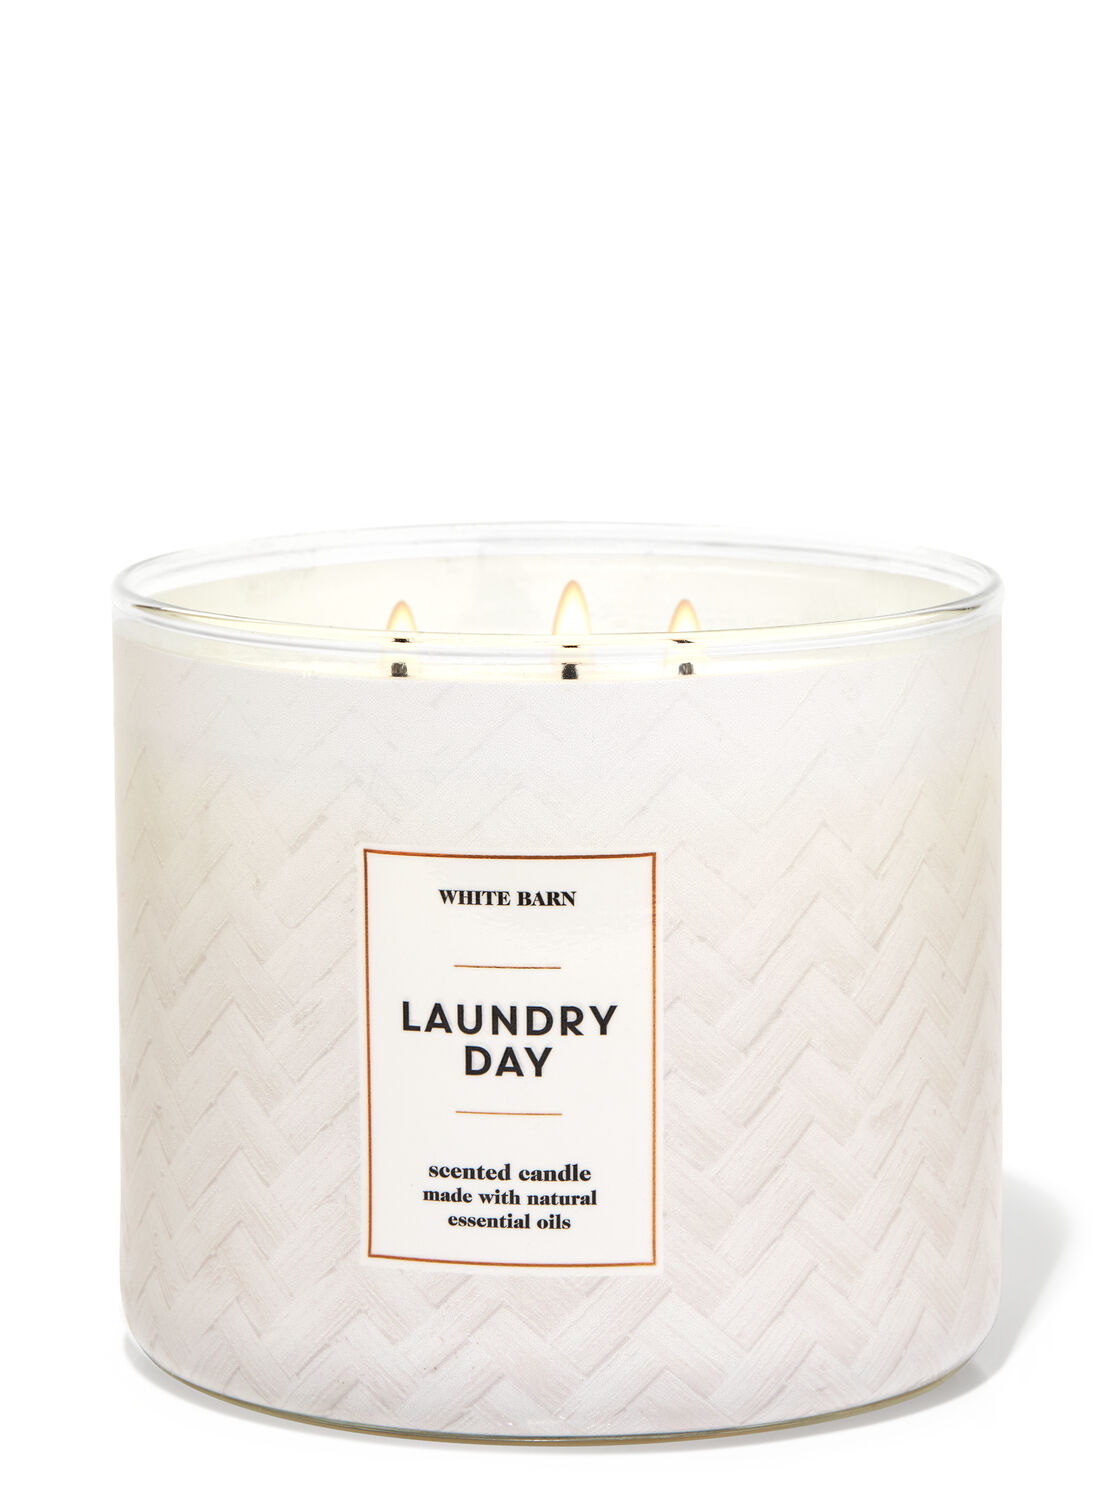 Scented Candle You Choose Bath & Body Works White Barn 4 oz 